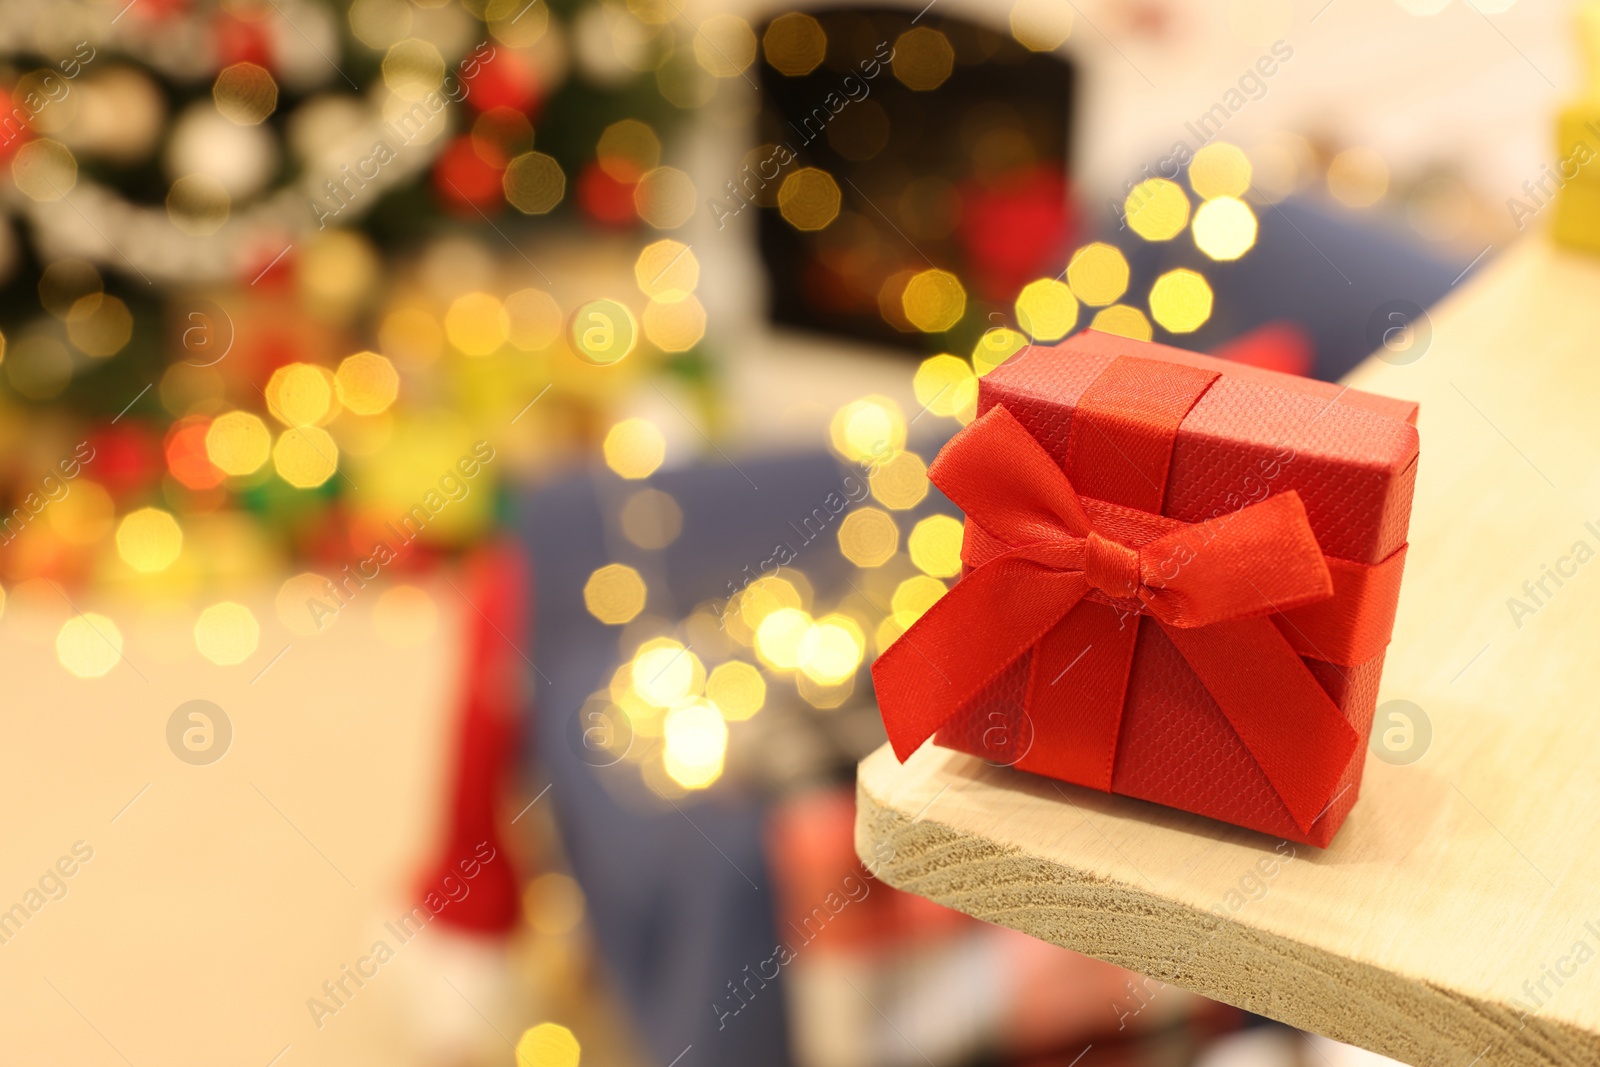 Photo of Red gift box on wooden shelf against blurred festive lights, space for text. Christmas celebration